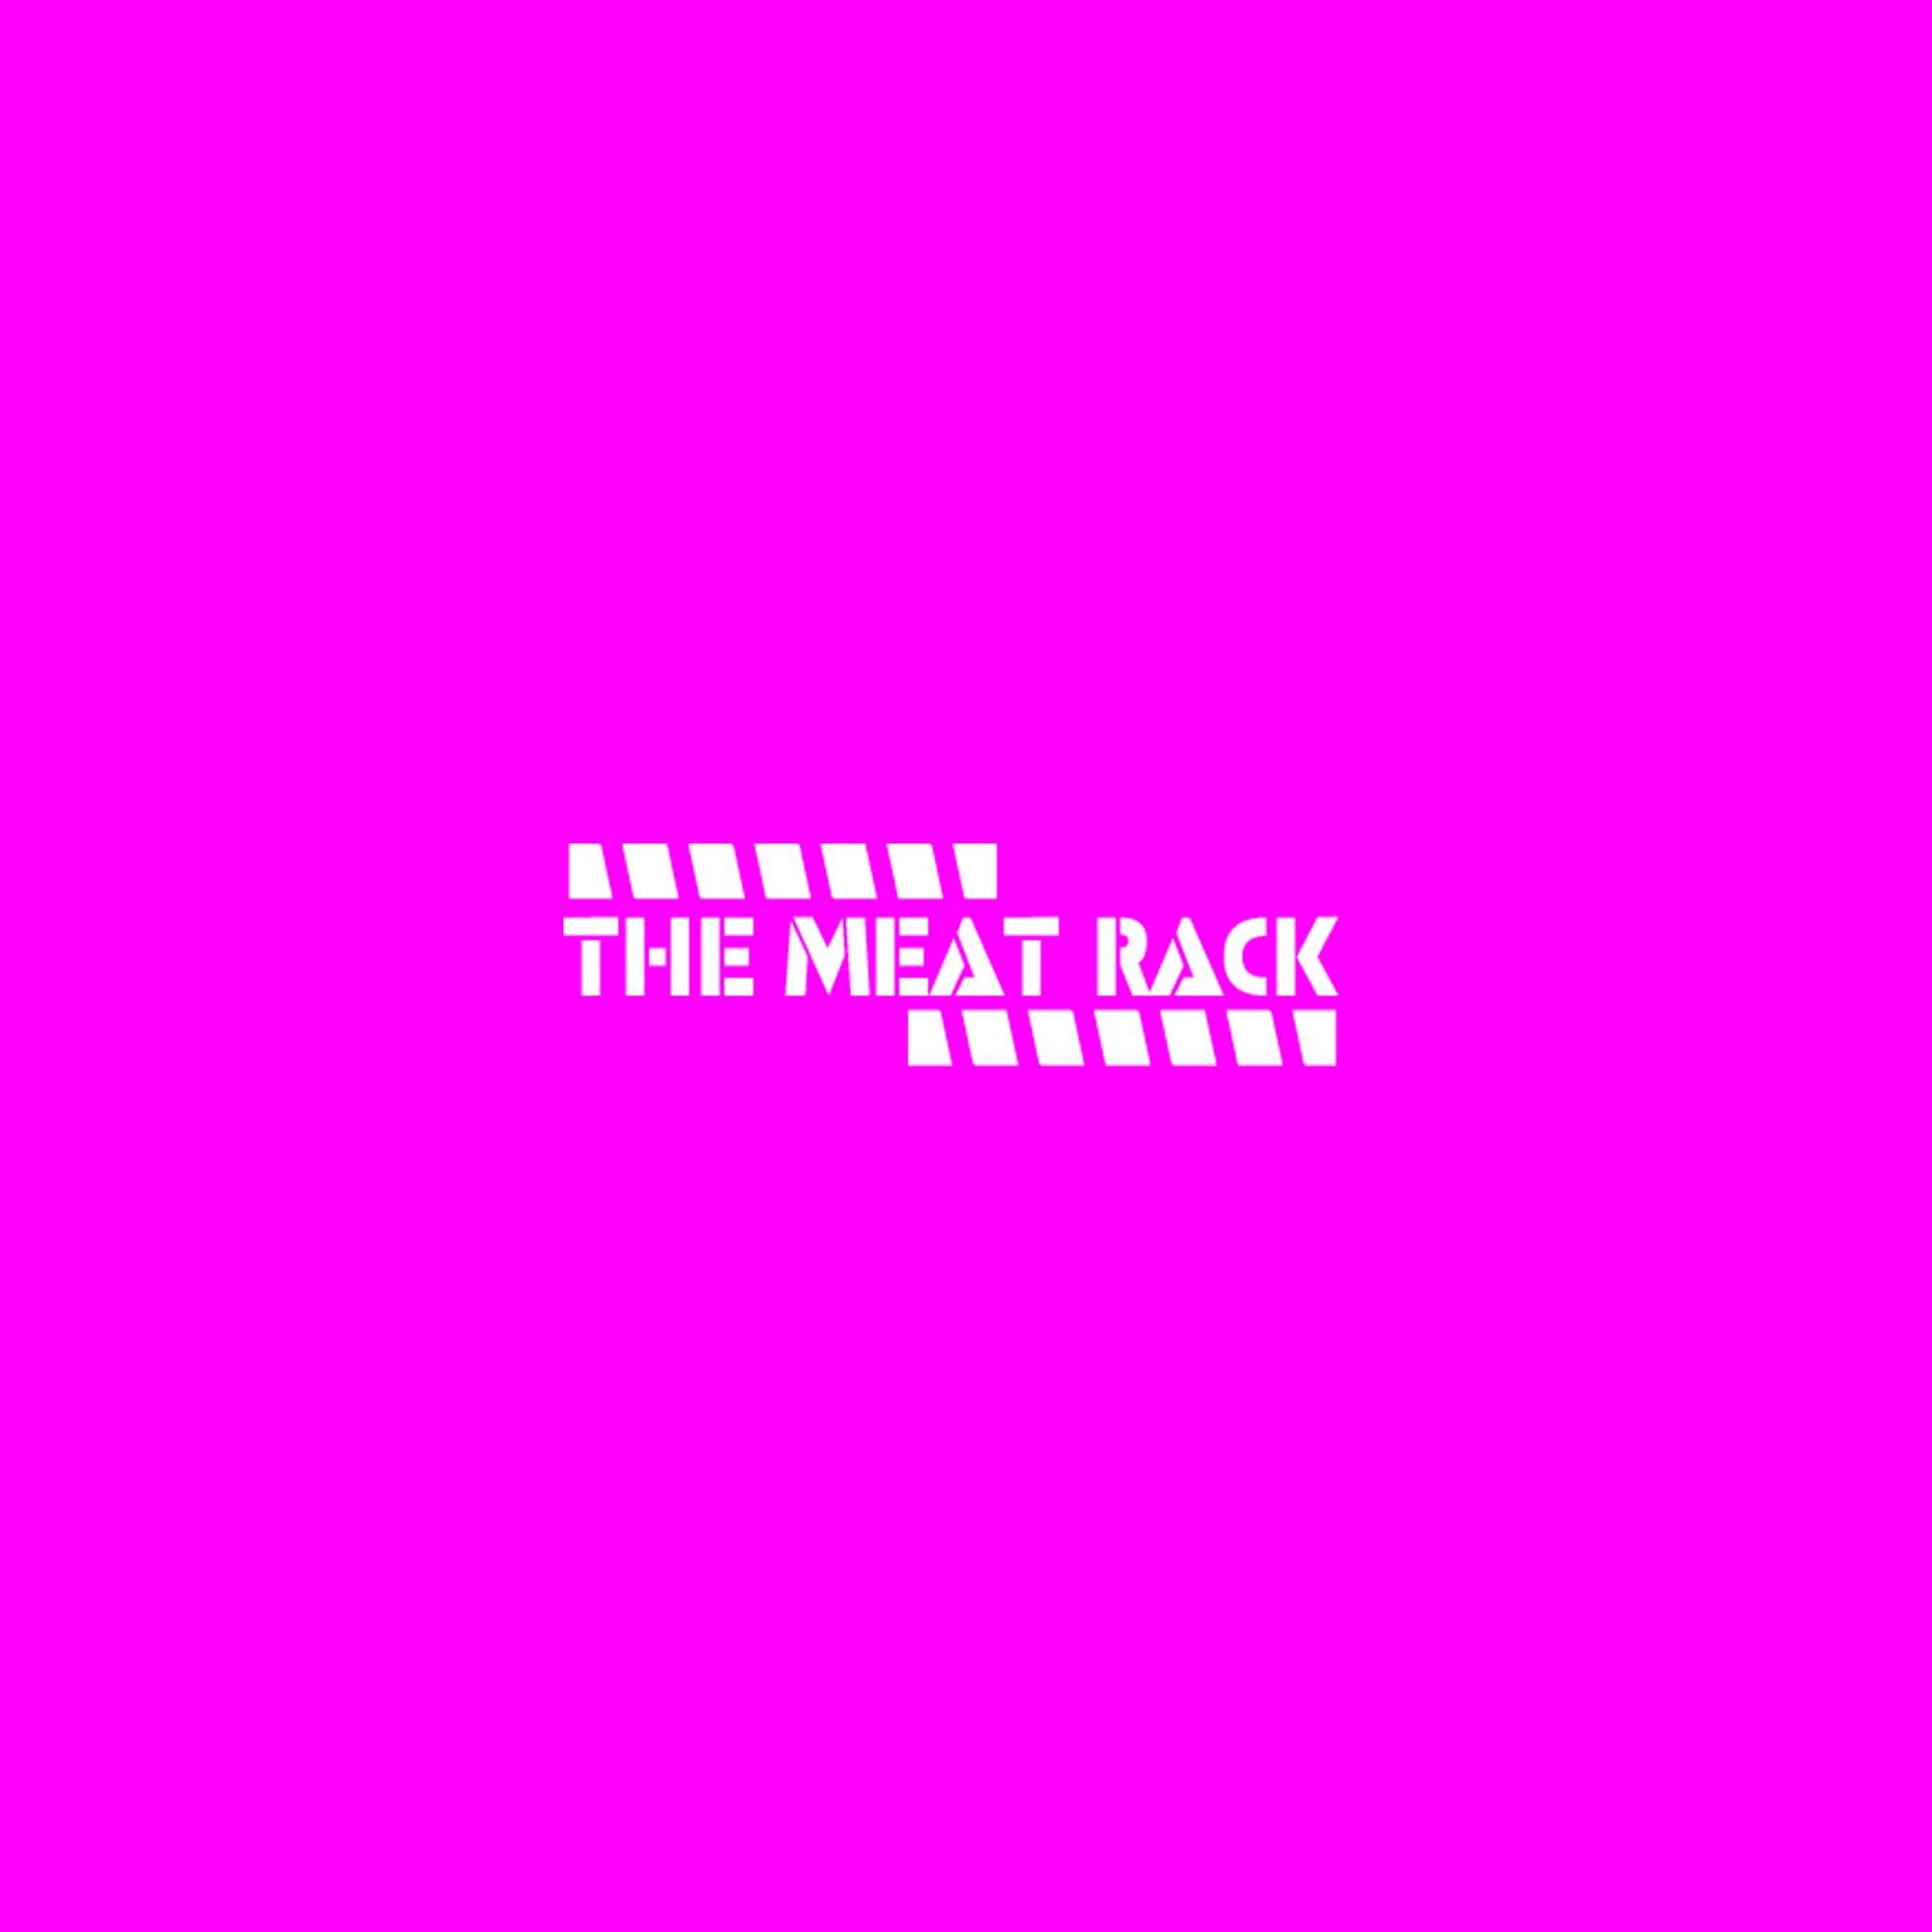 The Meat Rack